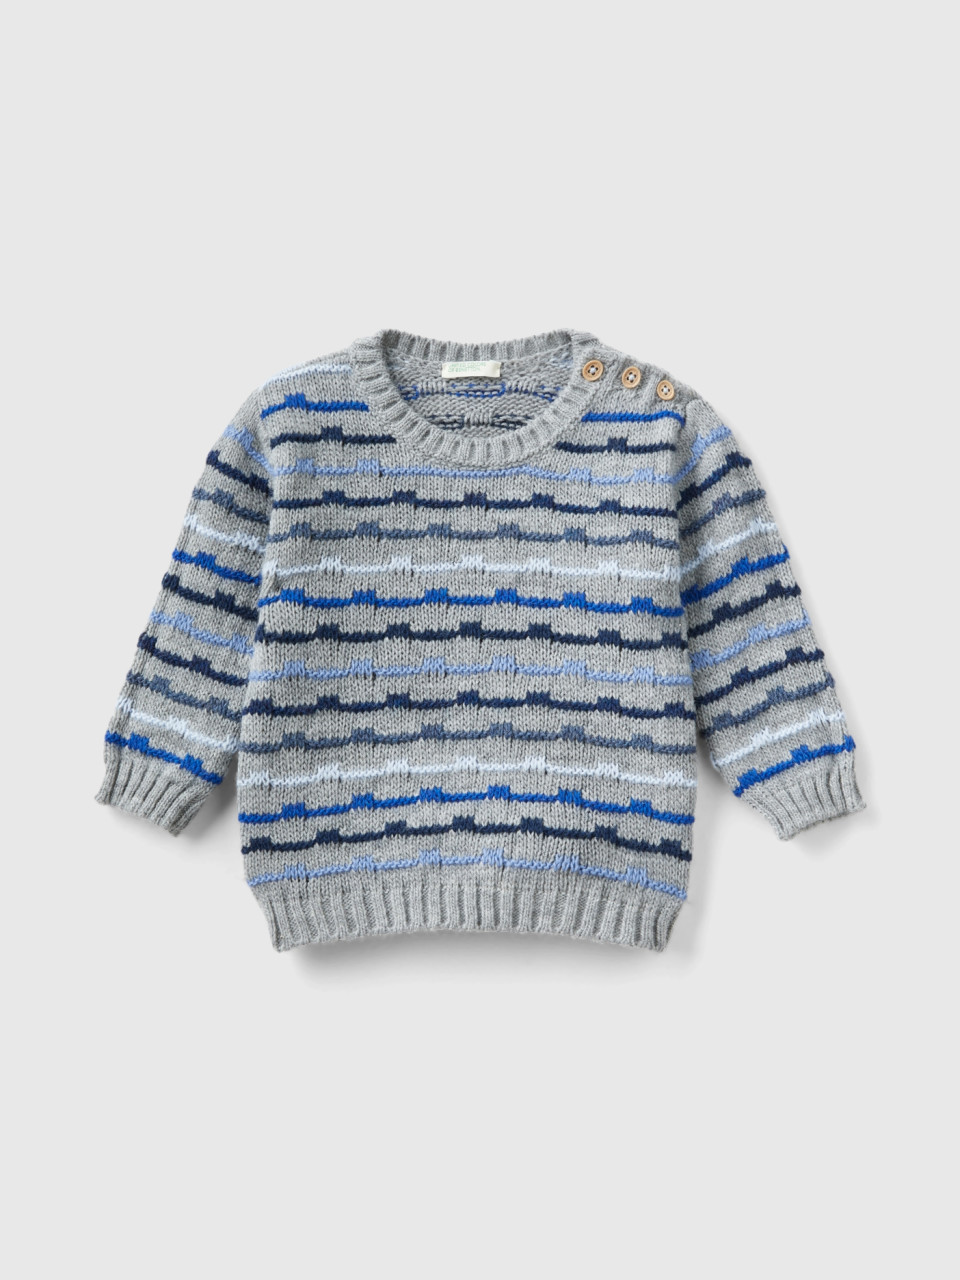 Benetton, Sweater In Wool Blend With Inlay, Multi-color, Kids